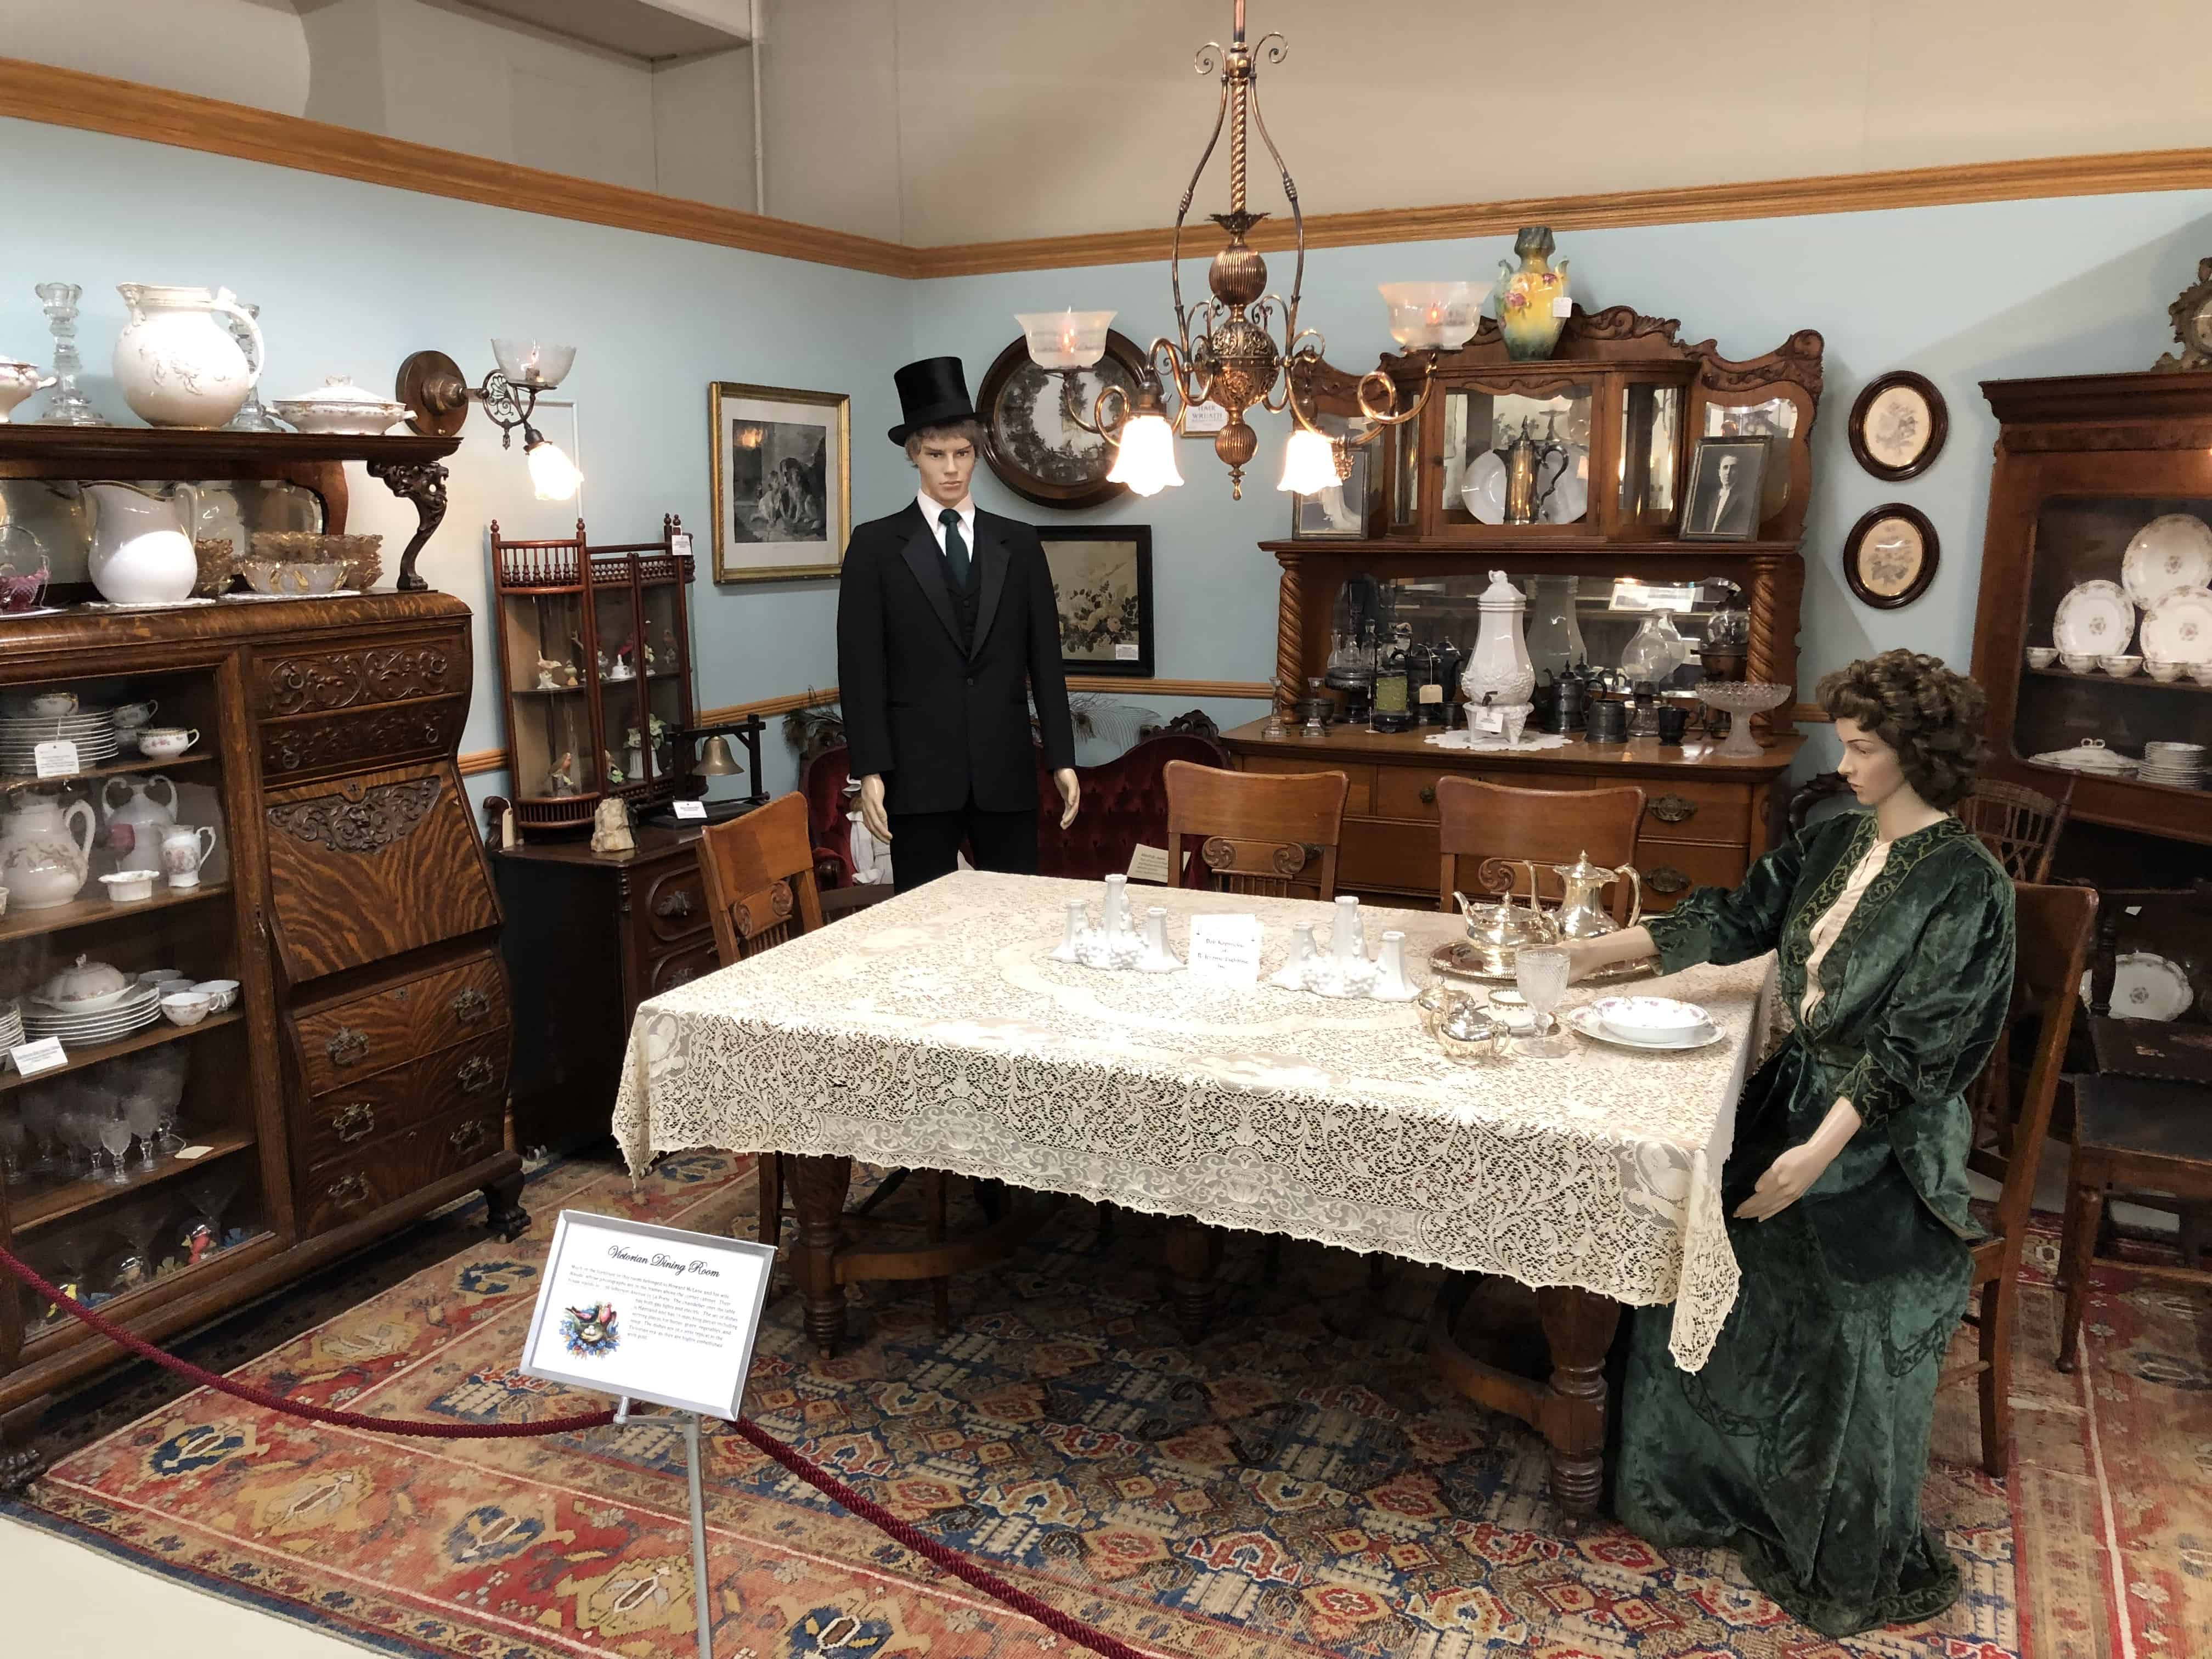 Victorian dining room at the La Porte County Historical Society Museum in La Porte, Indiana